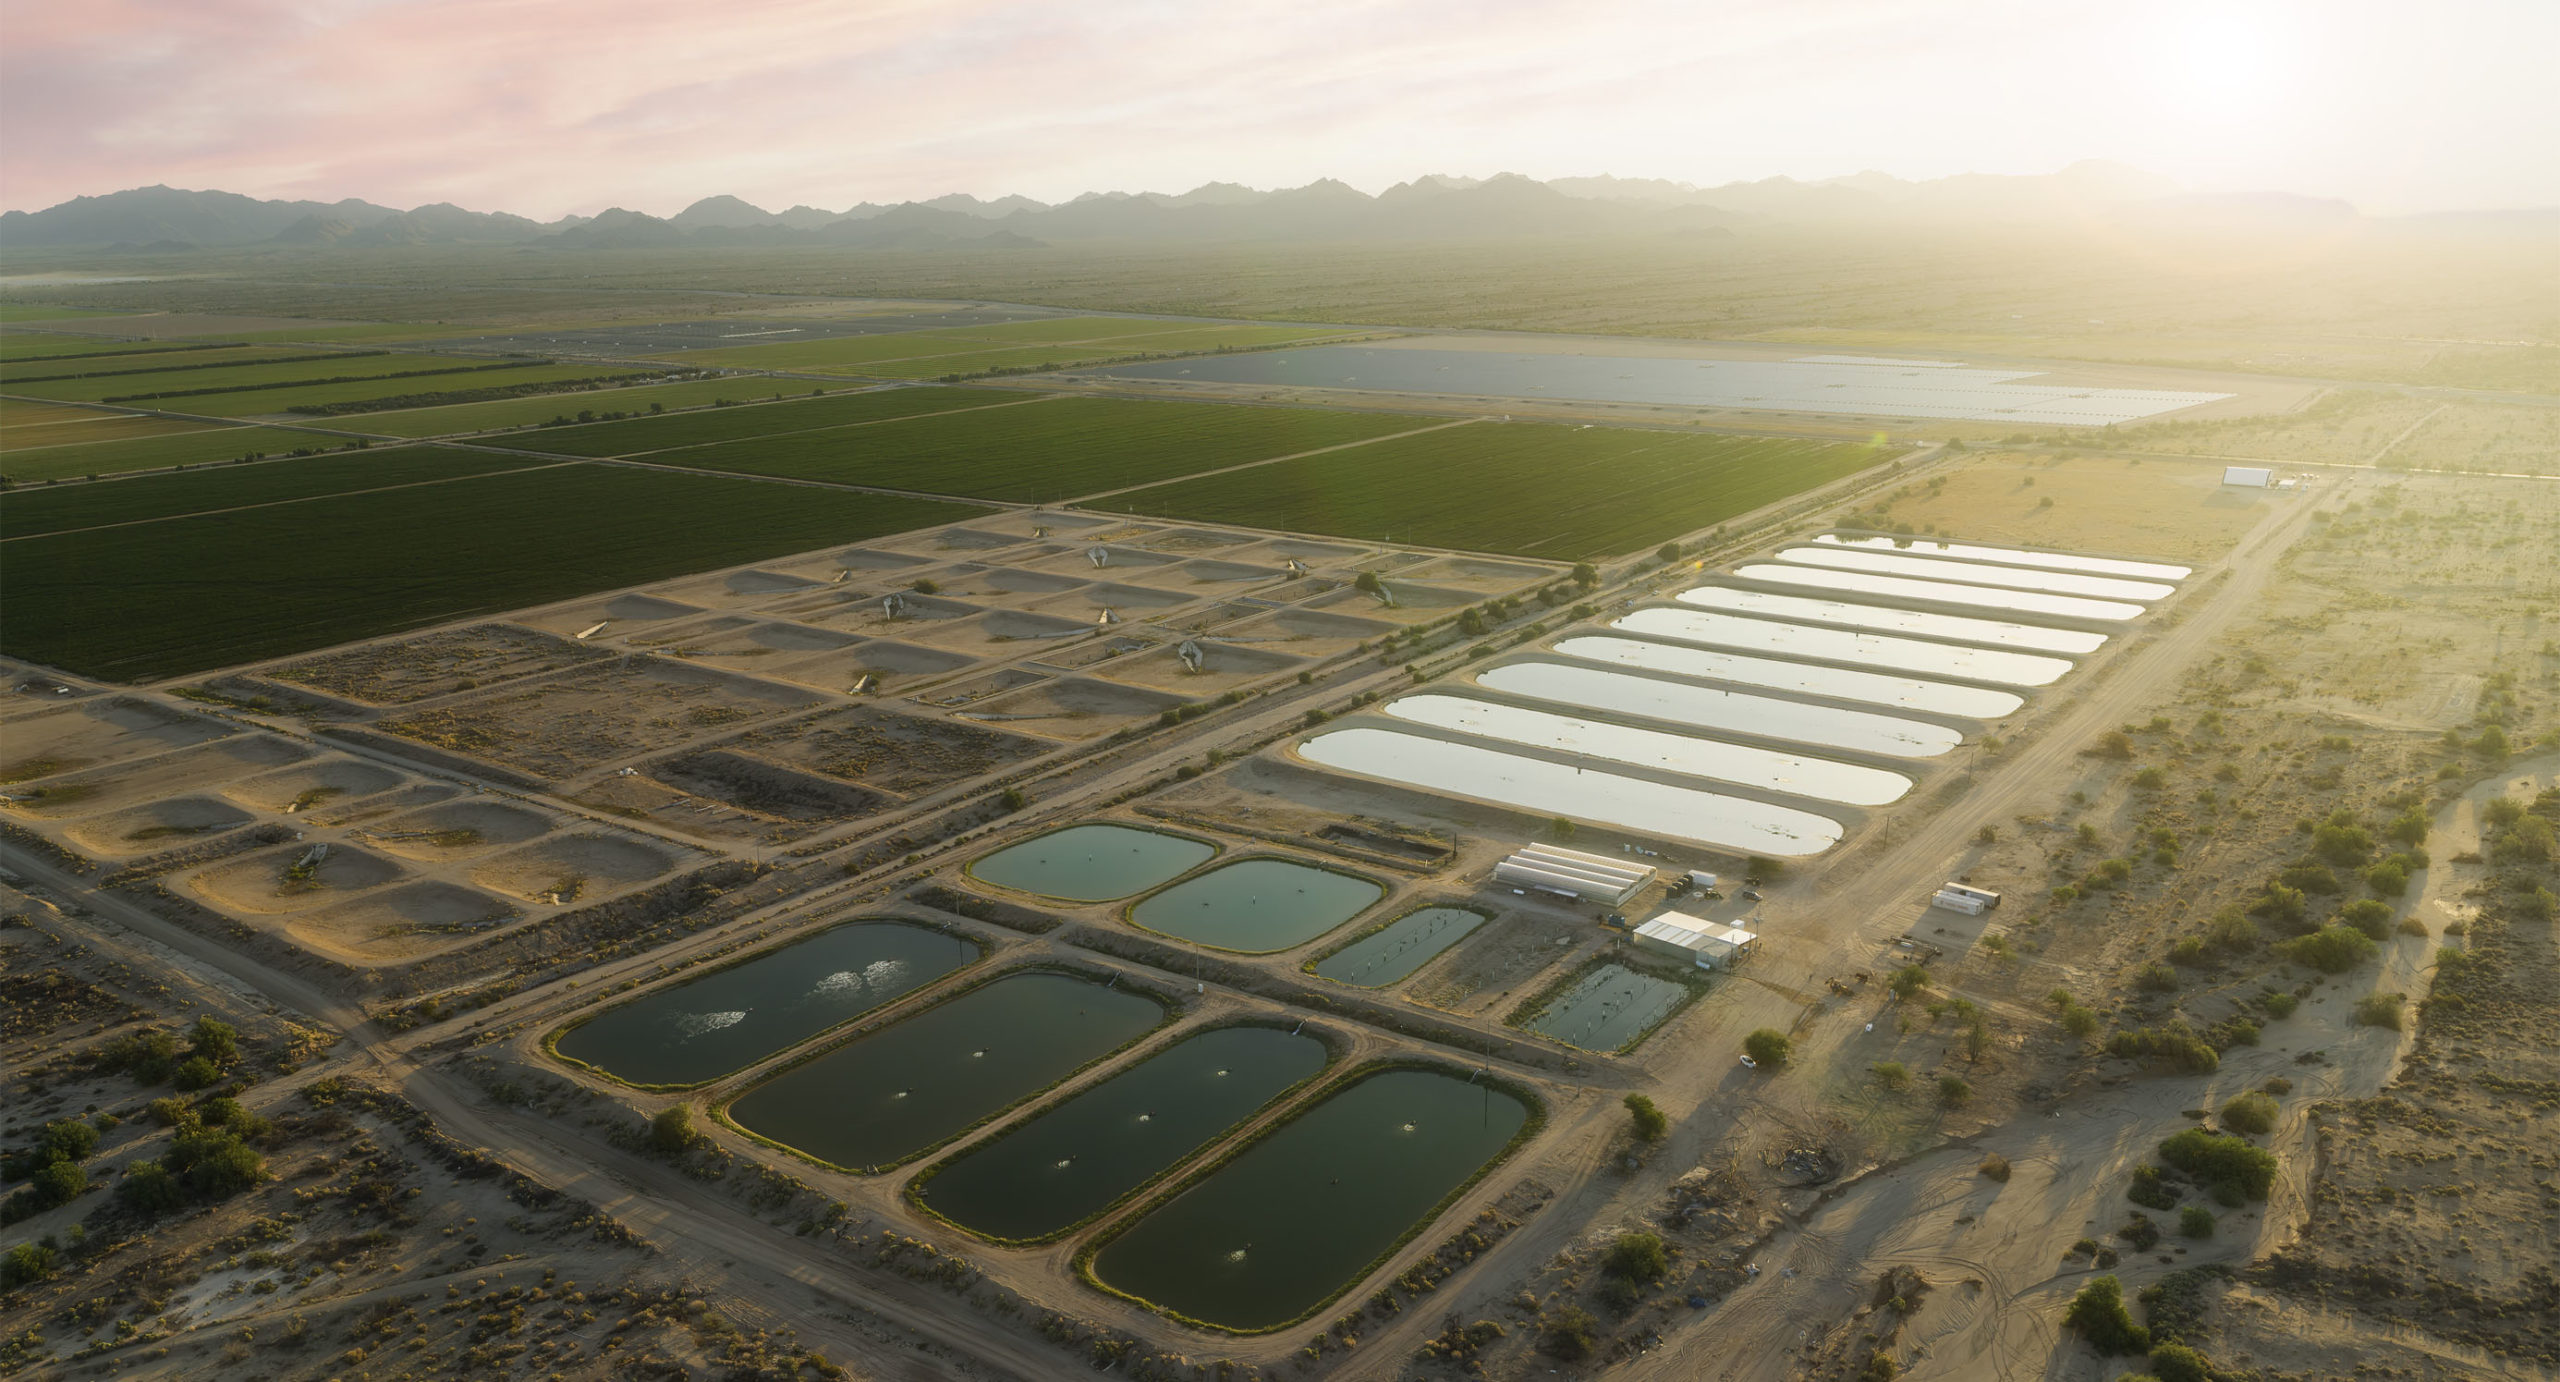 Phoenix Commercial Photographer, Travis Neely, produces agriculture photography for farming industries such as this organic shrimp farm in Arizona.